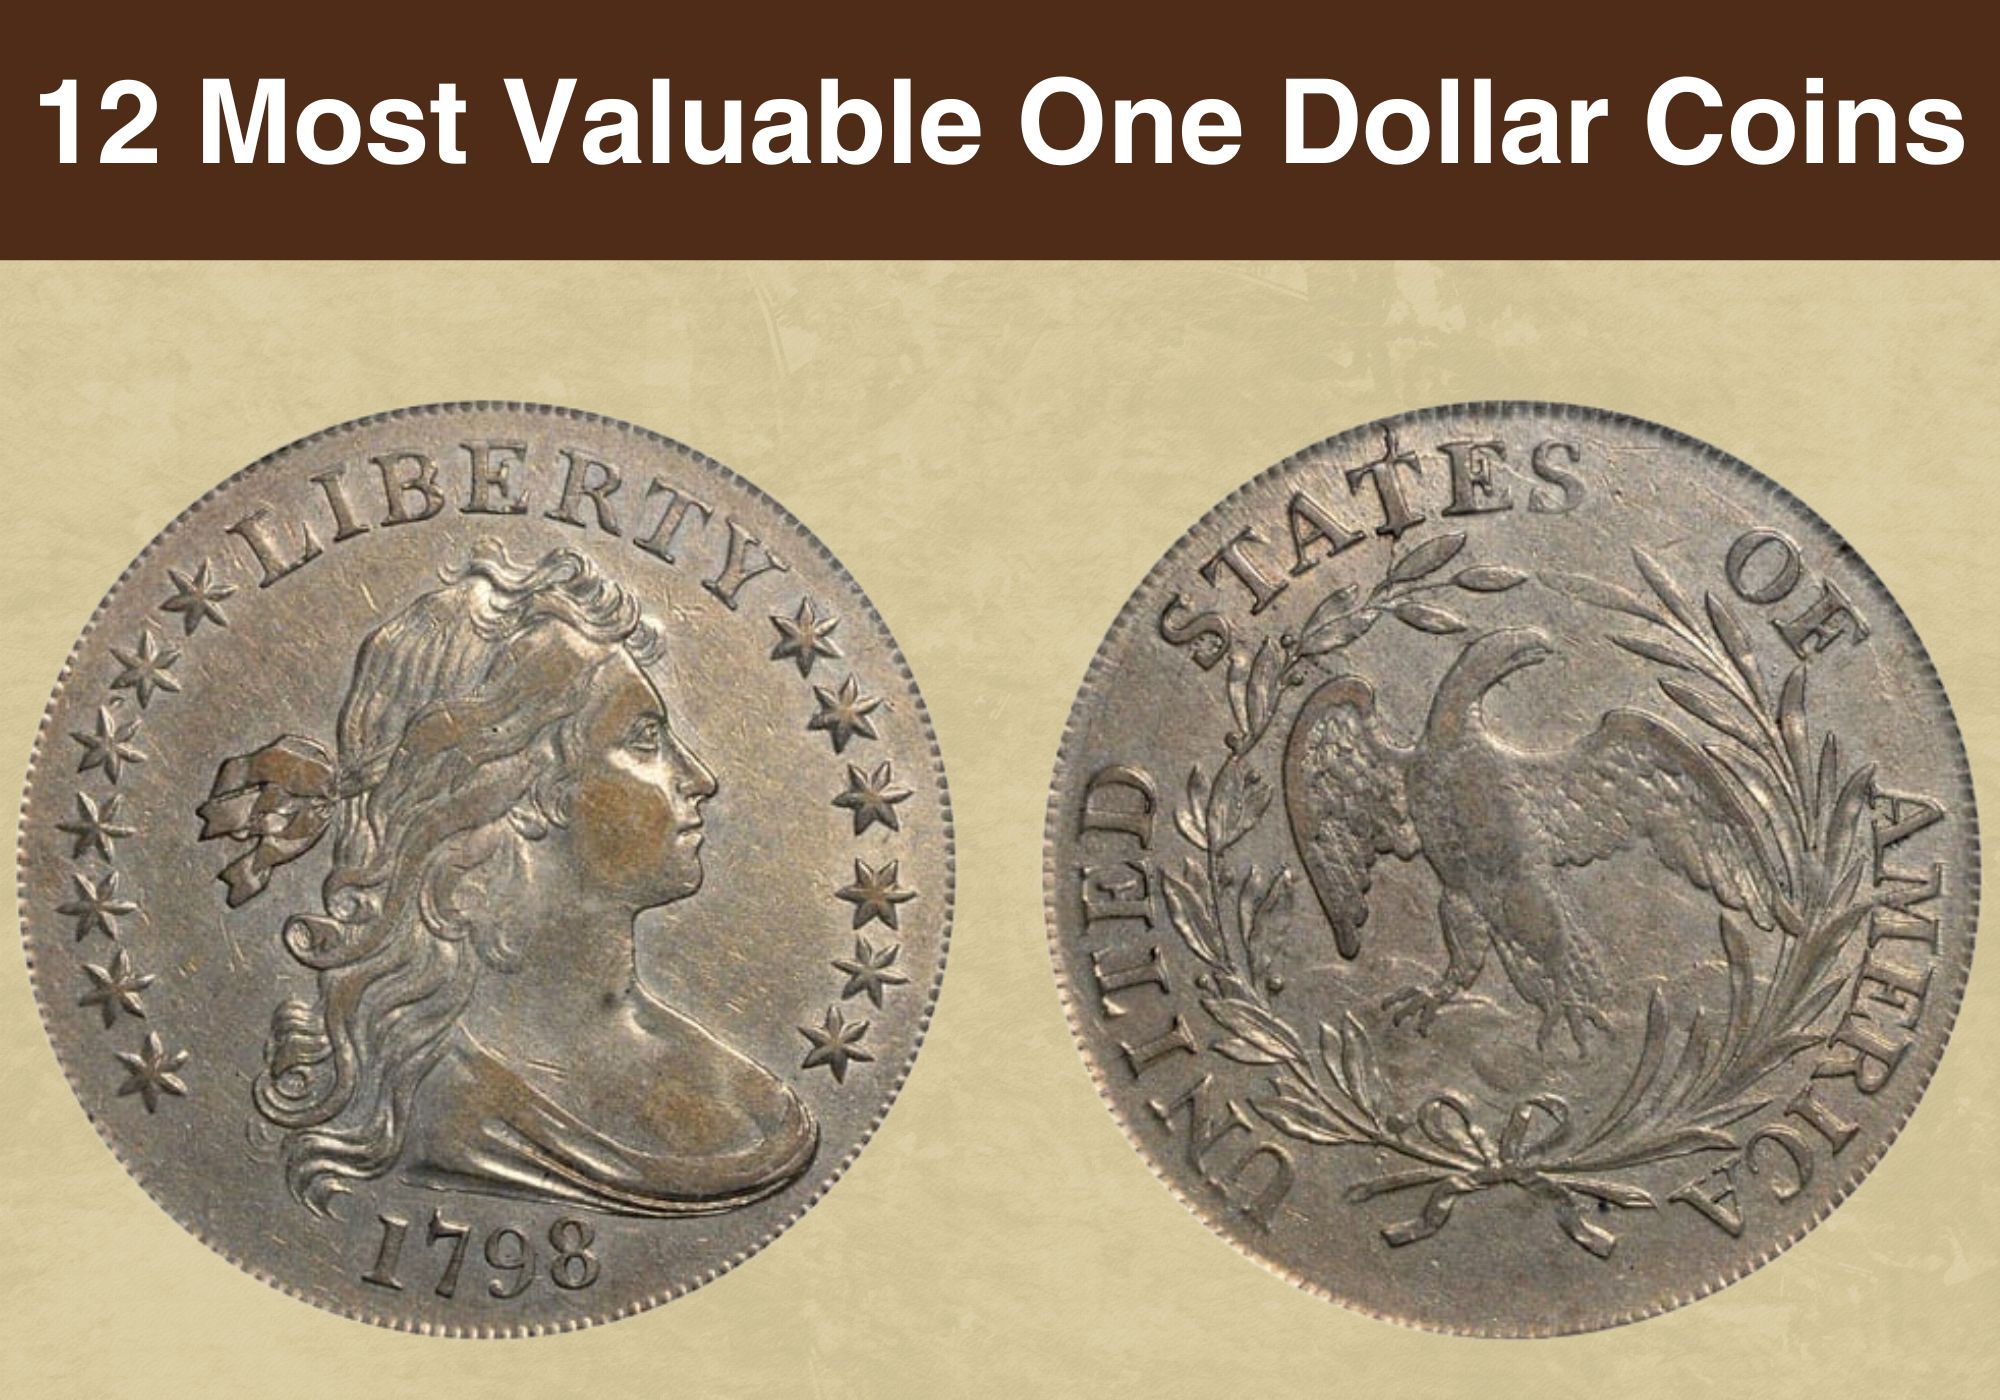 12 Most Valuable One Dollar Coins